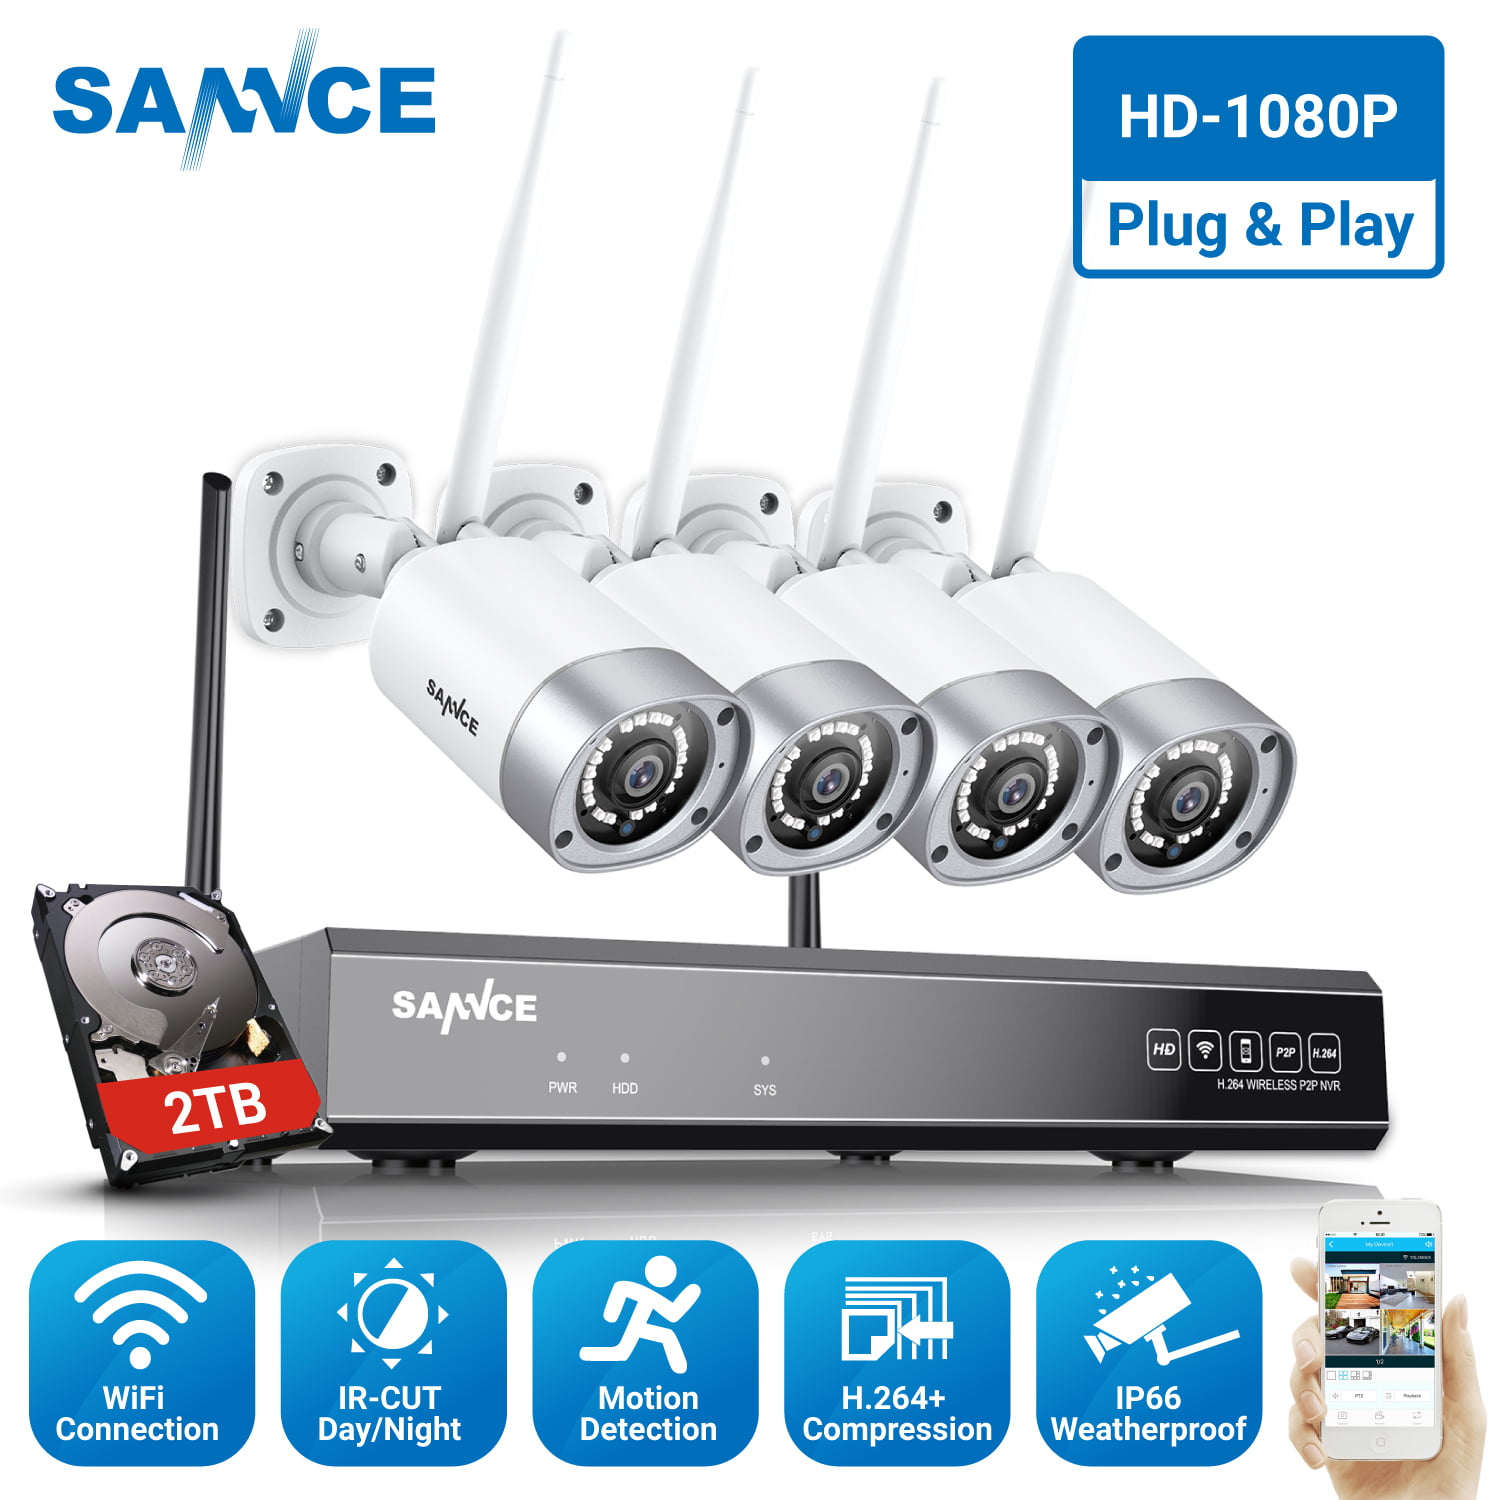 ANNKE 4CH Wireless Home Security Camera System 4 Channel 960P Video Surveillance CCTV NVR Kit 4 720P Wireless Outdoor Indoor WiFi IP Camera 100ft Night Vision 1TB HDD Motion Detection Remote Viewing